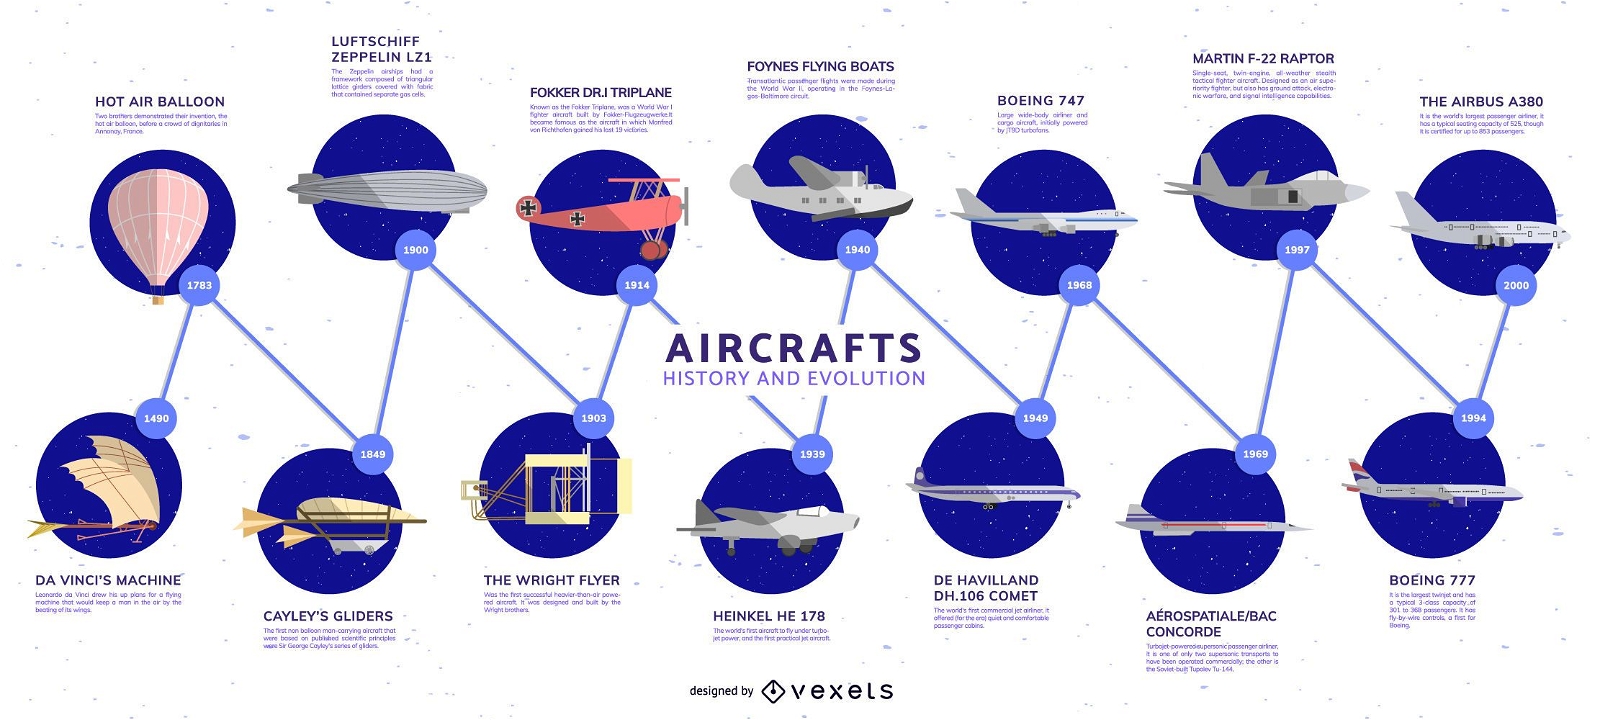 Evolution Of Aircraft Timeline Infographic Vector Download